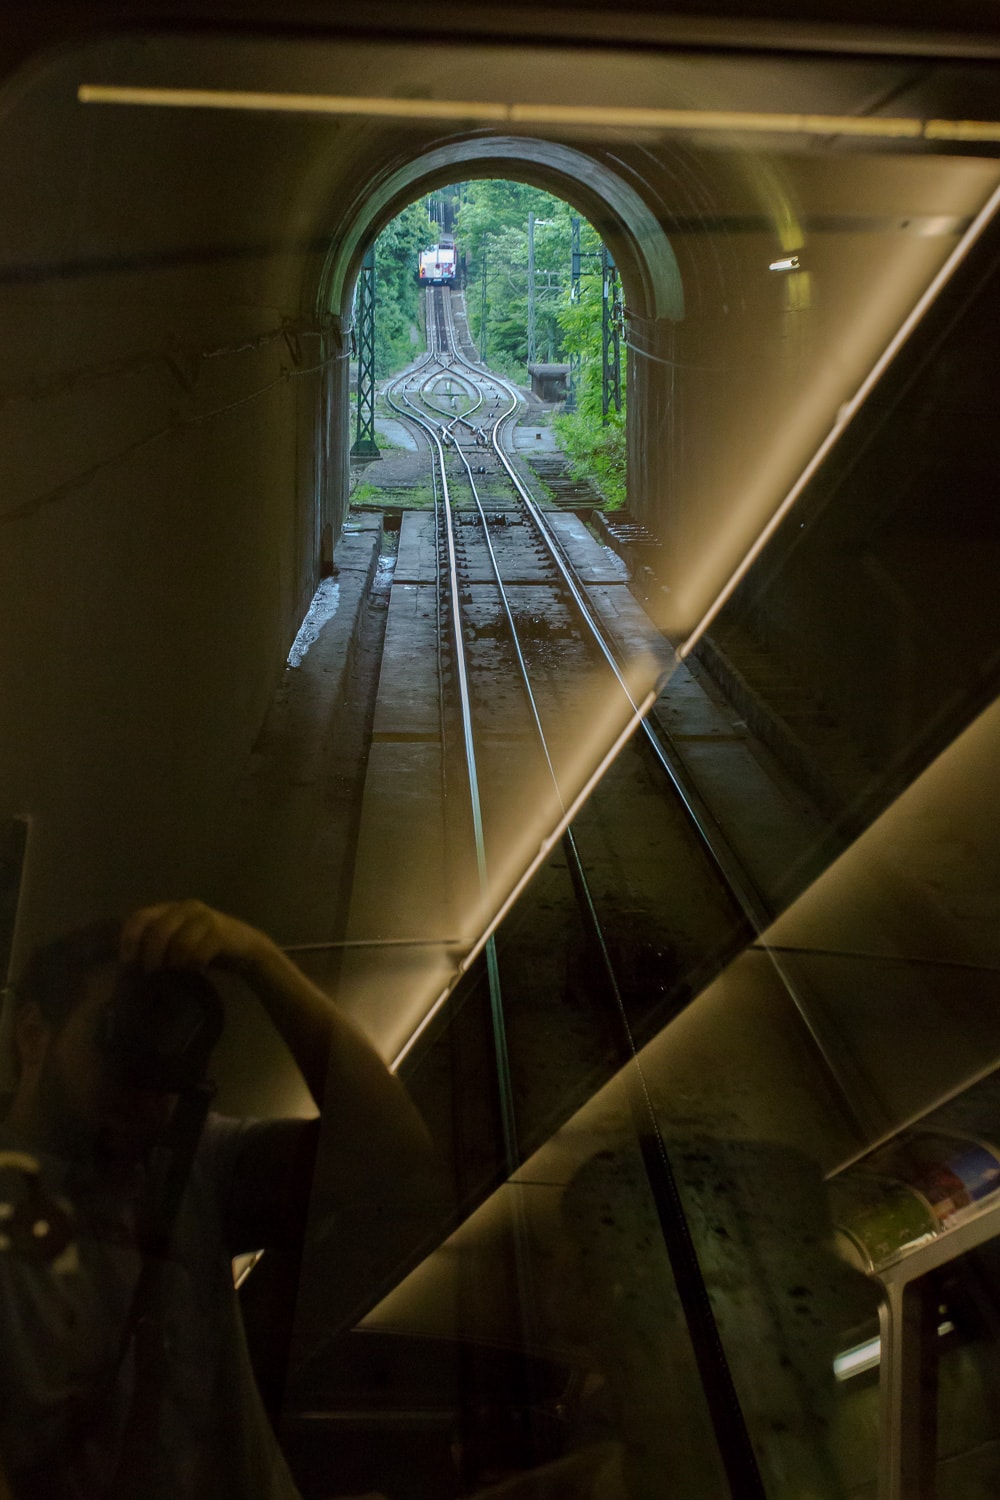 Accidental self-portrait, and a view from the Mount Rokko cable car (Osaka, Japan)